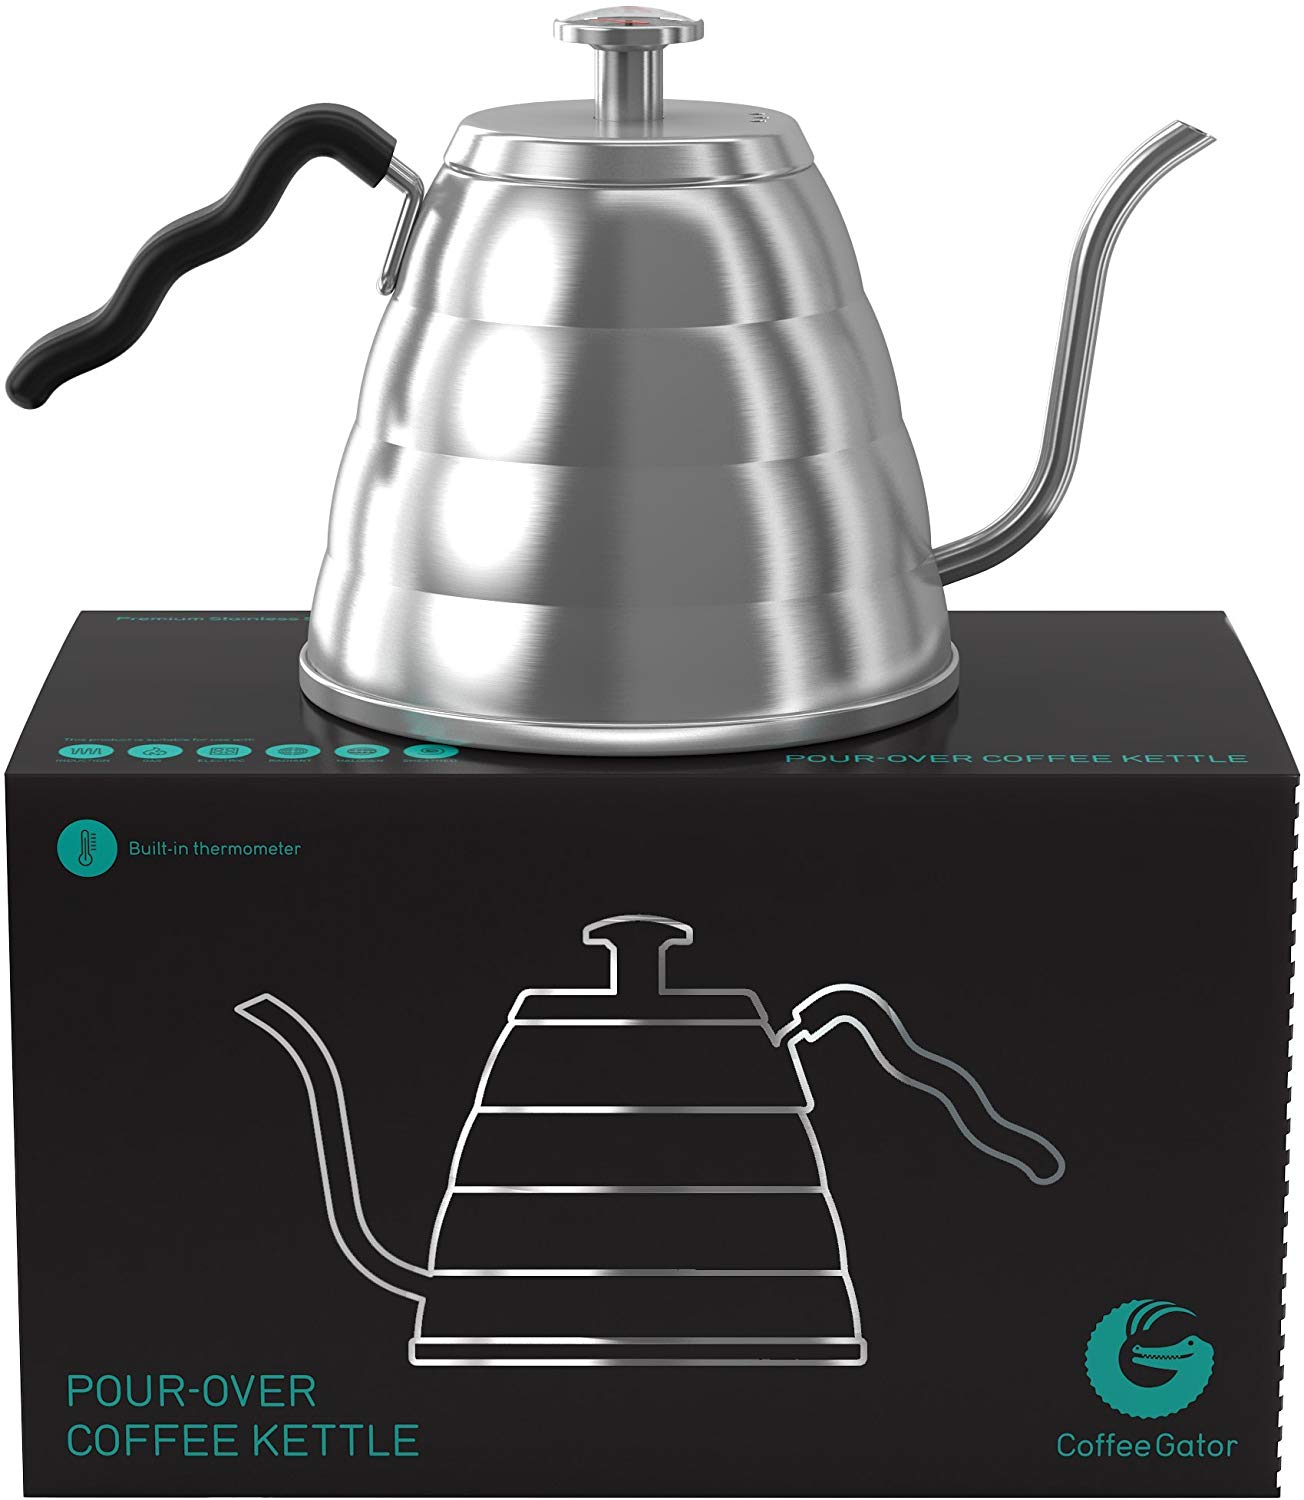 Pour over gooseneck kettle by Coffee Gator